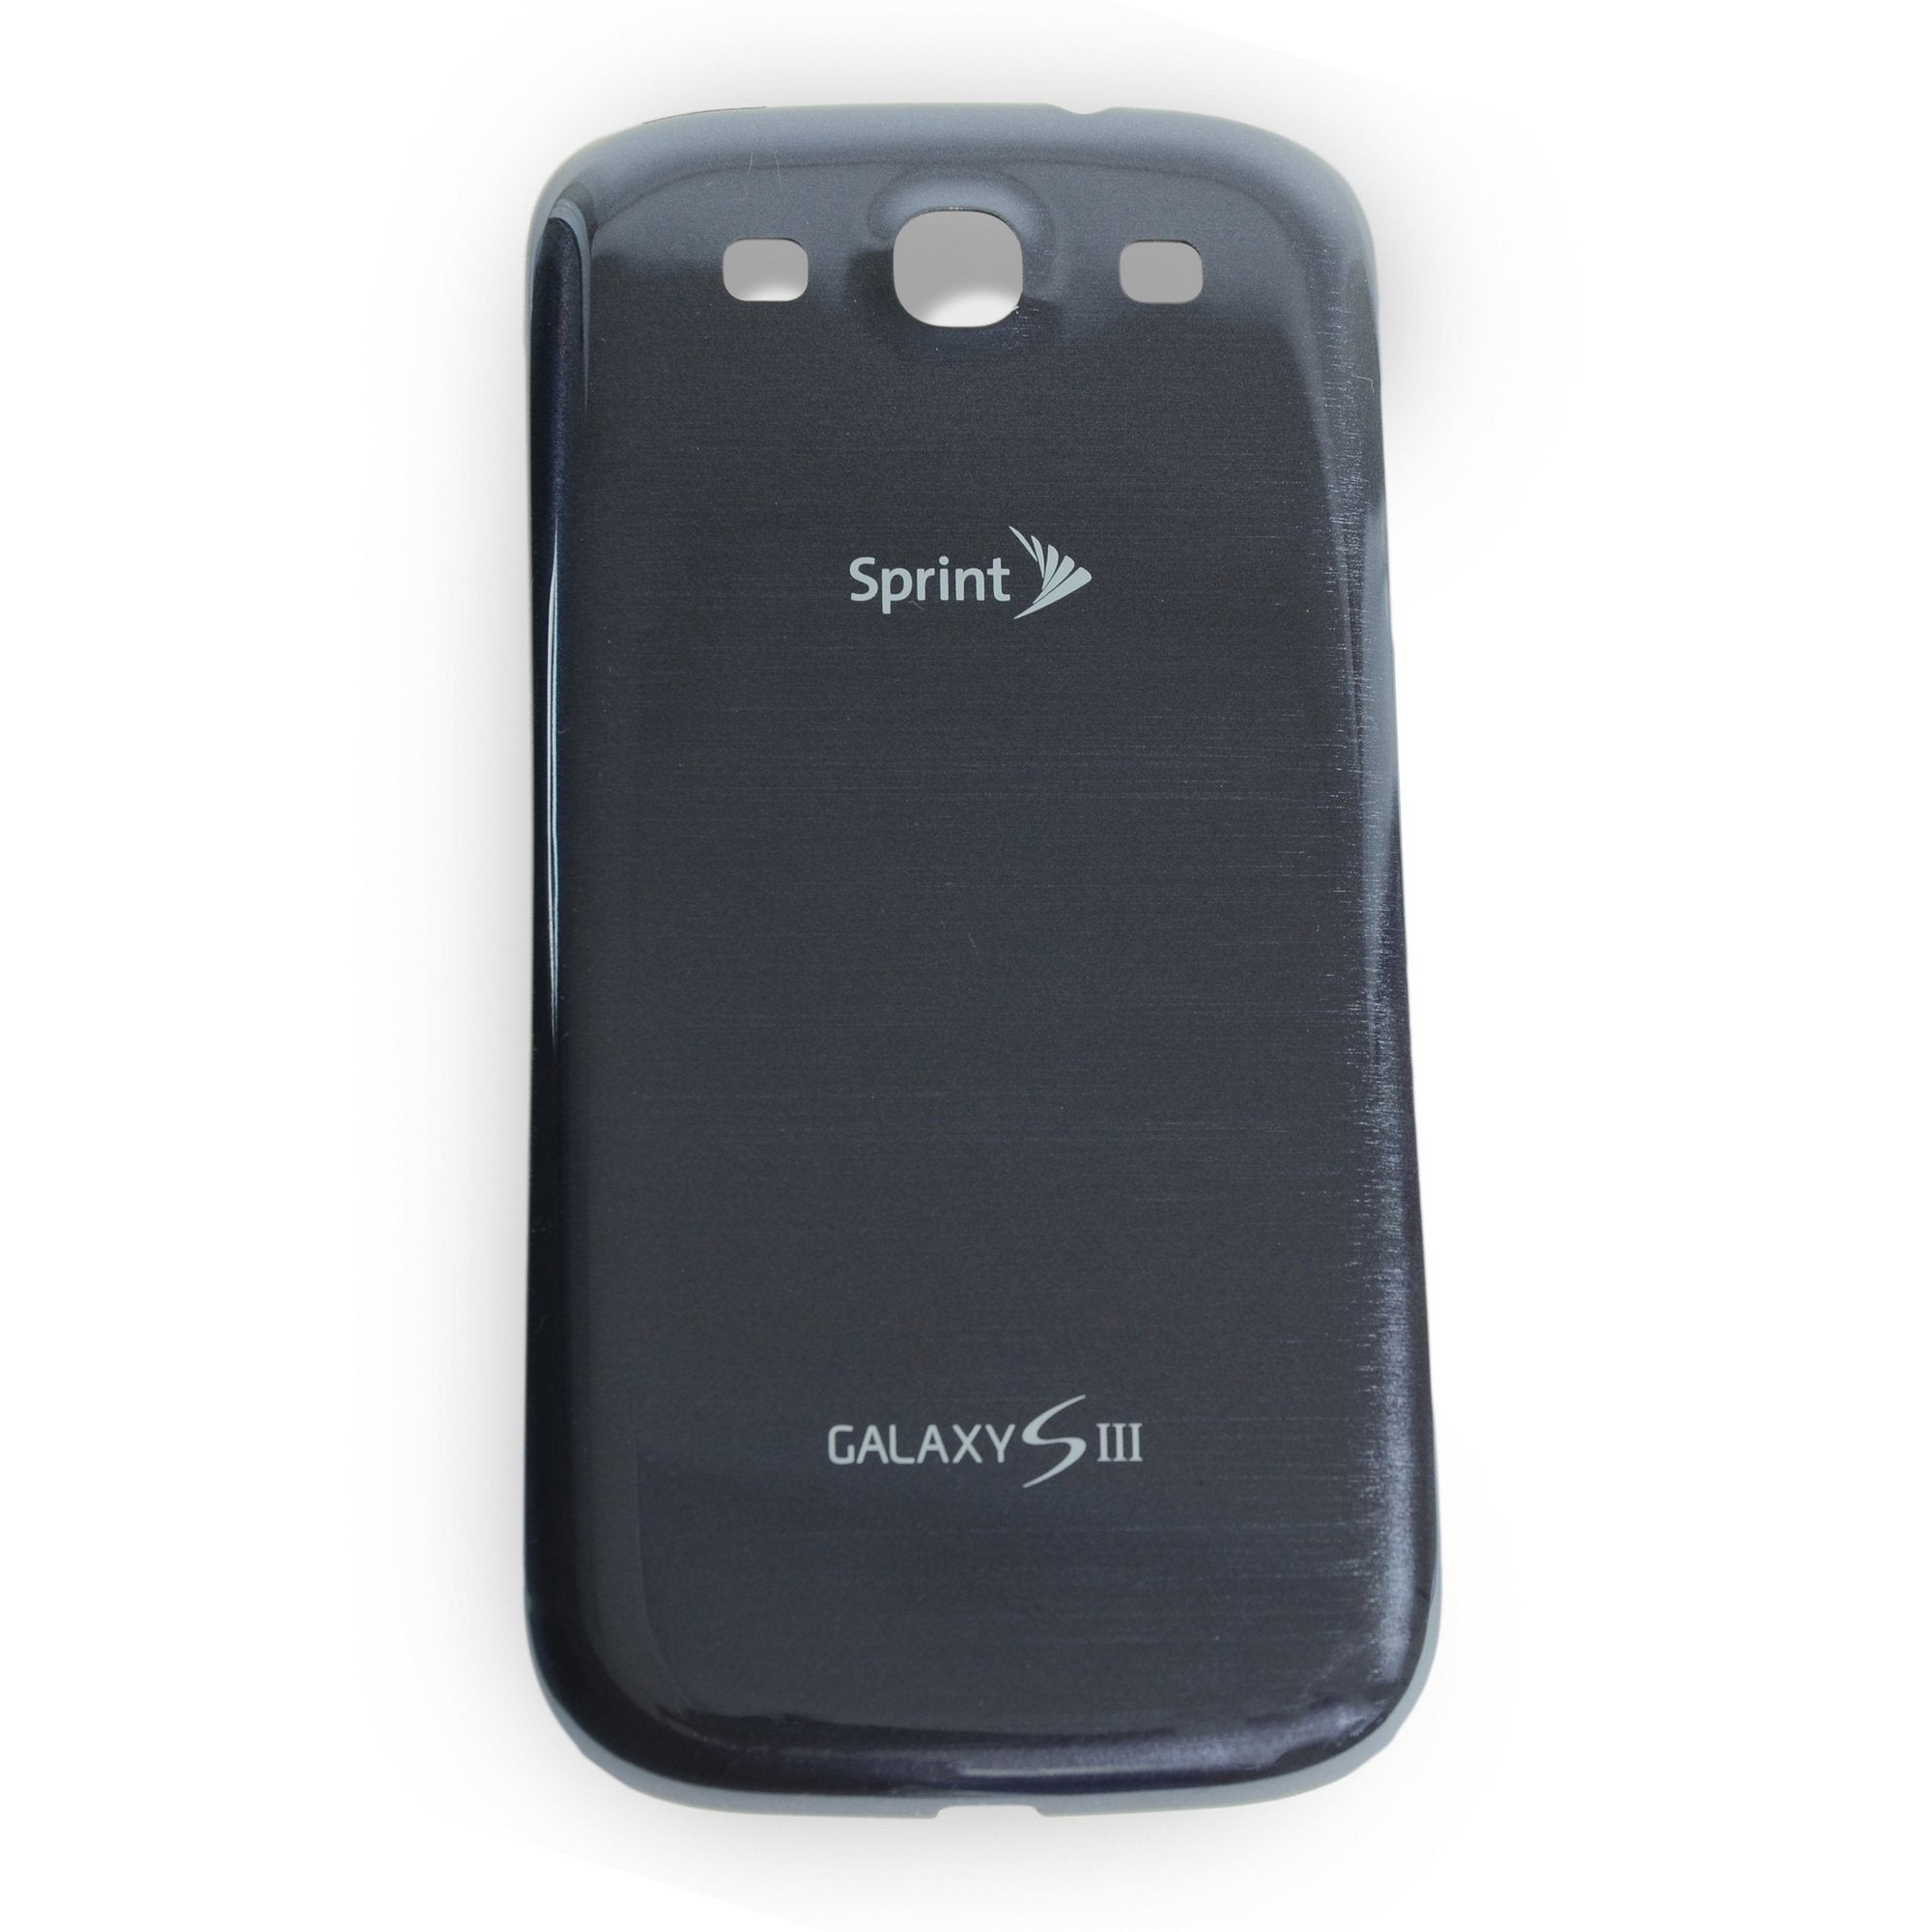 Galaxy S III Battery Cover (Sprint) Blue New